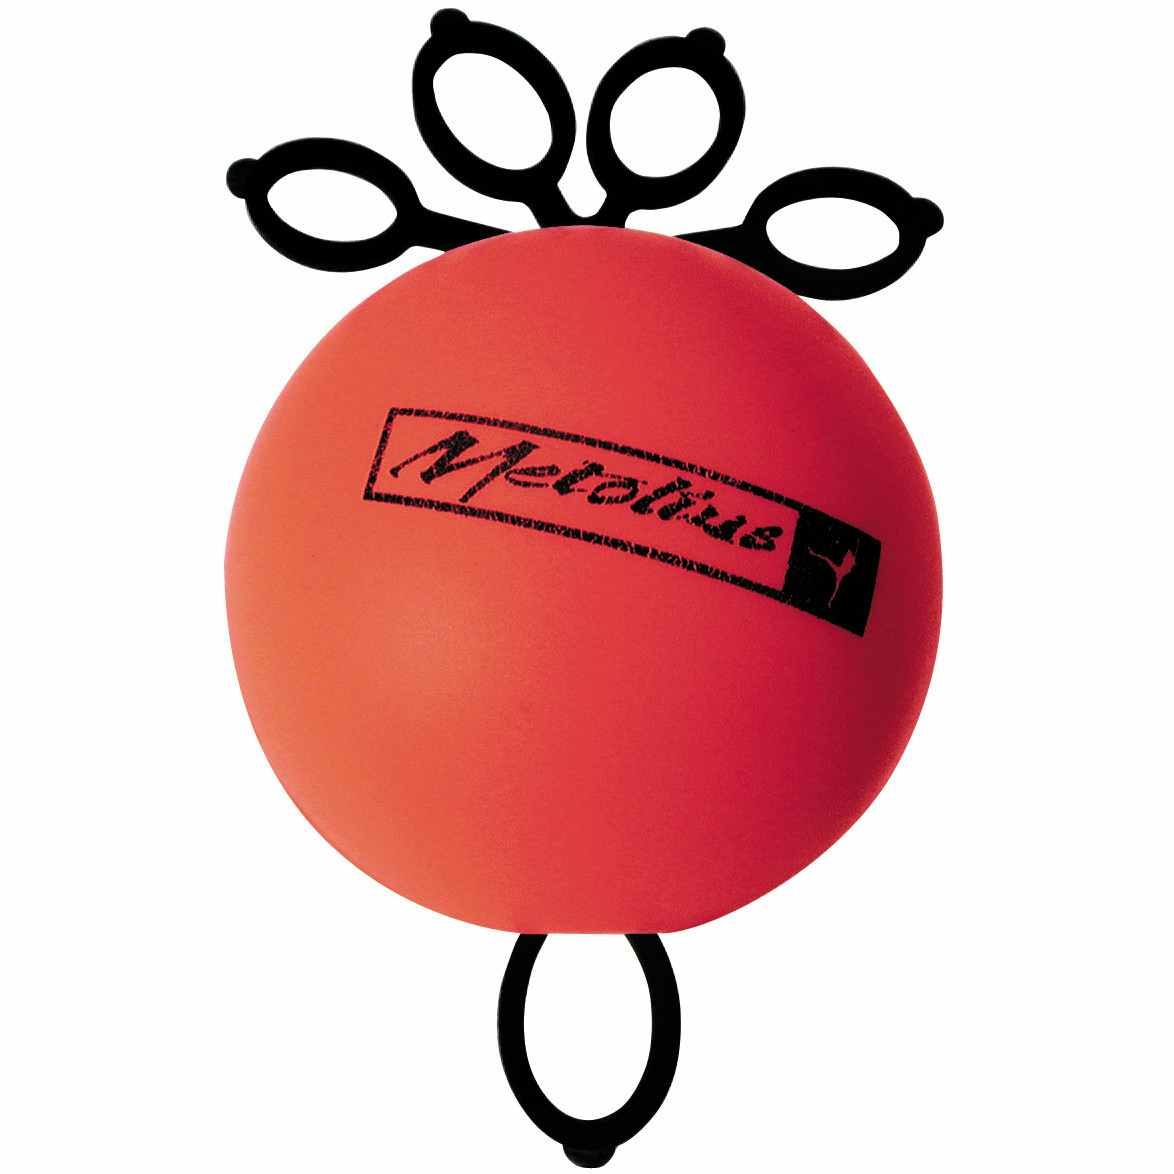 Grip Saver Plus Exercise Ball Red